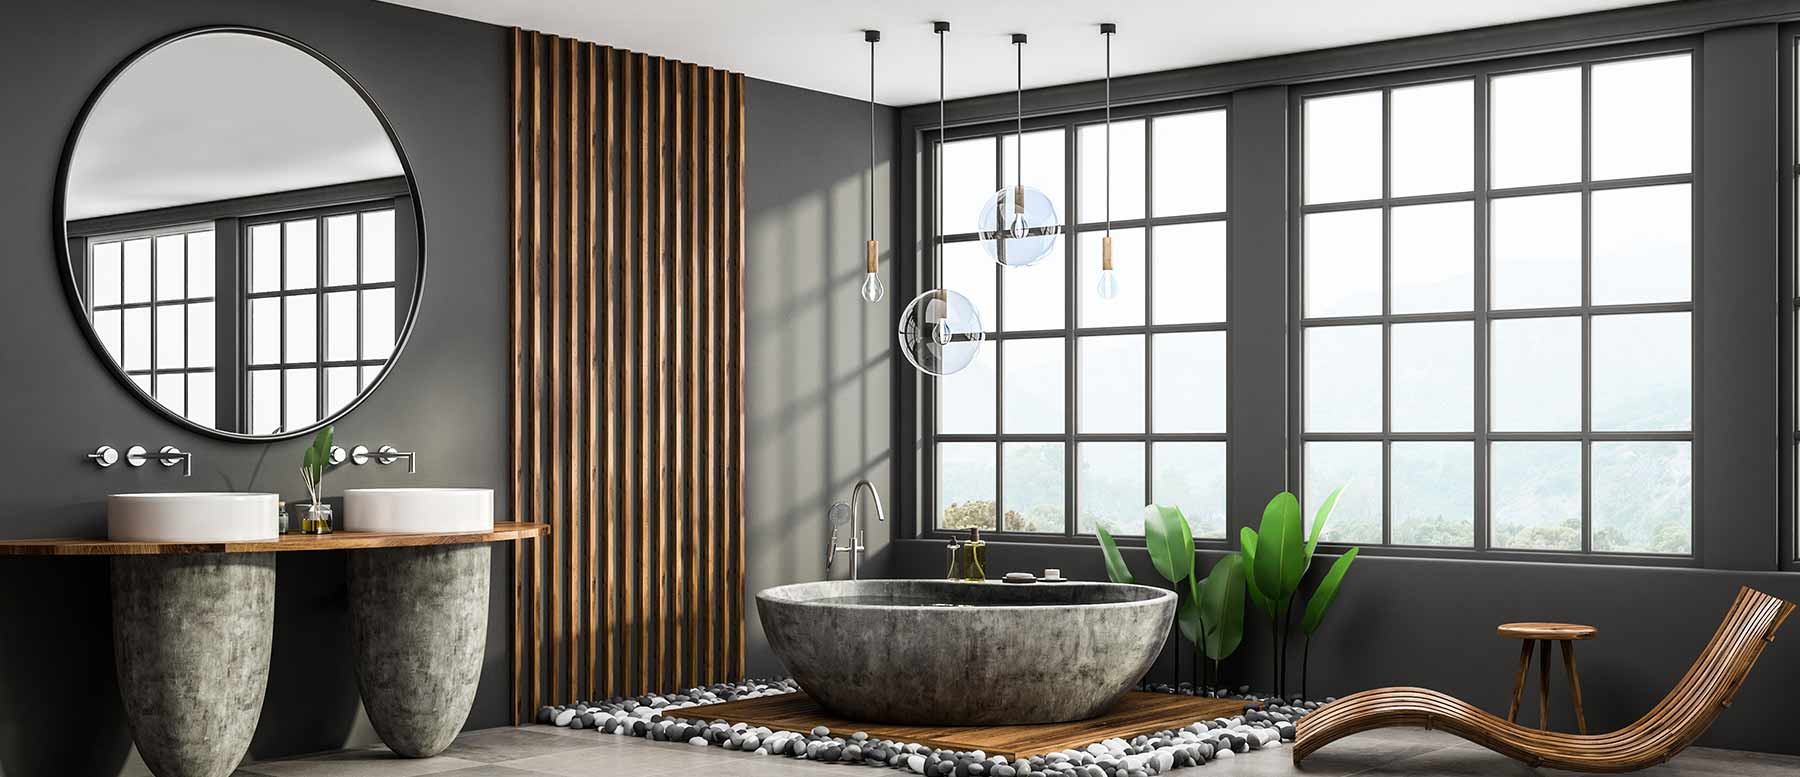 All about furniture for a luxury bathroom